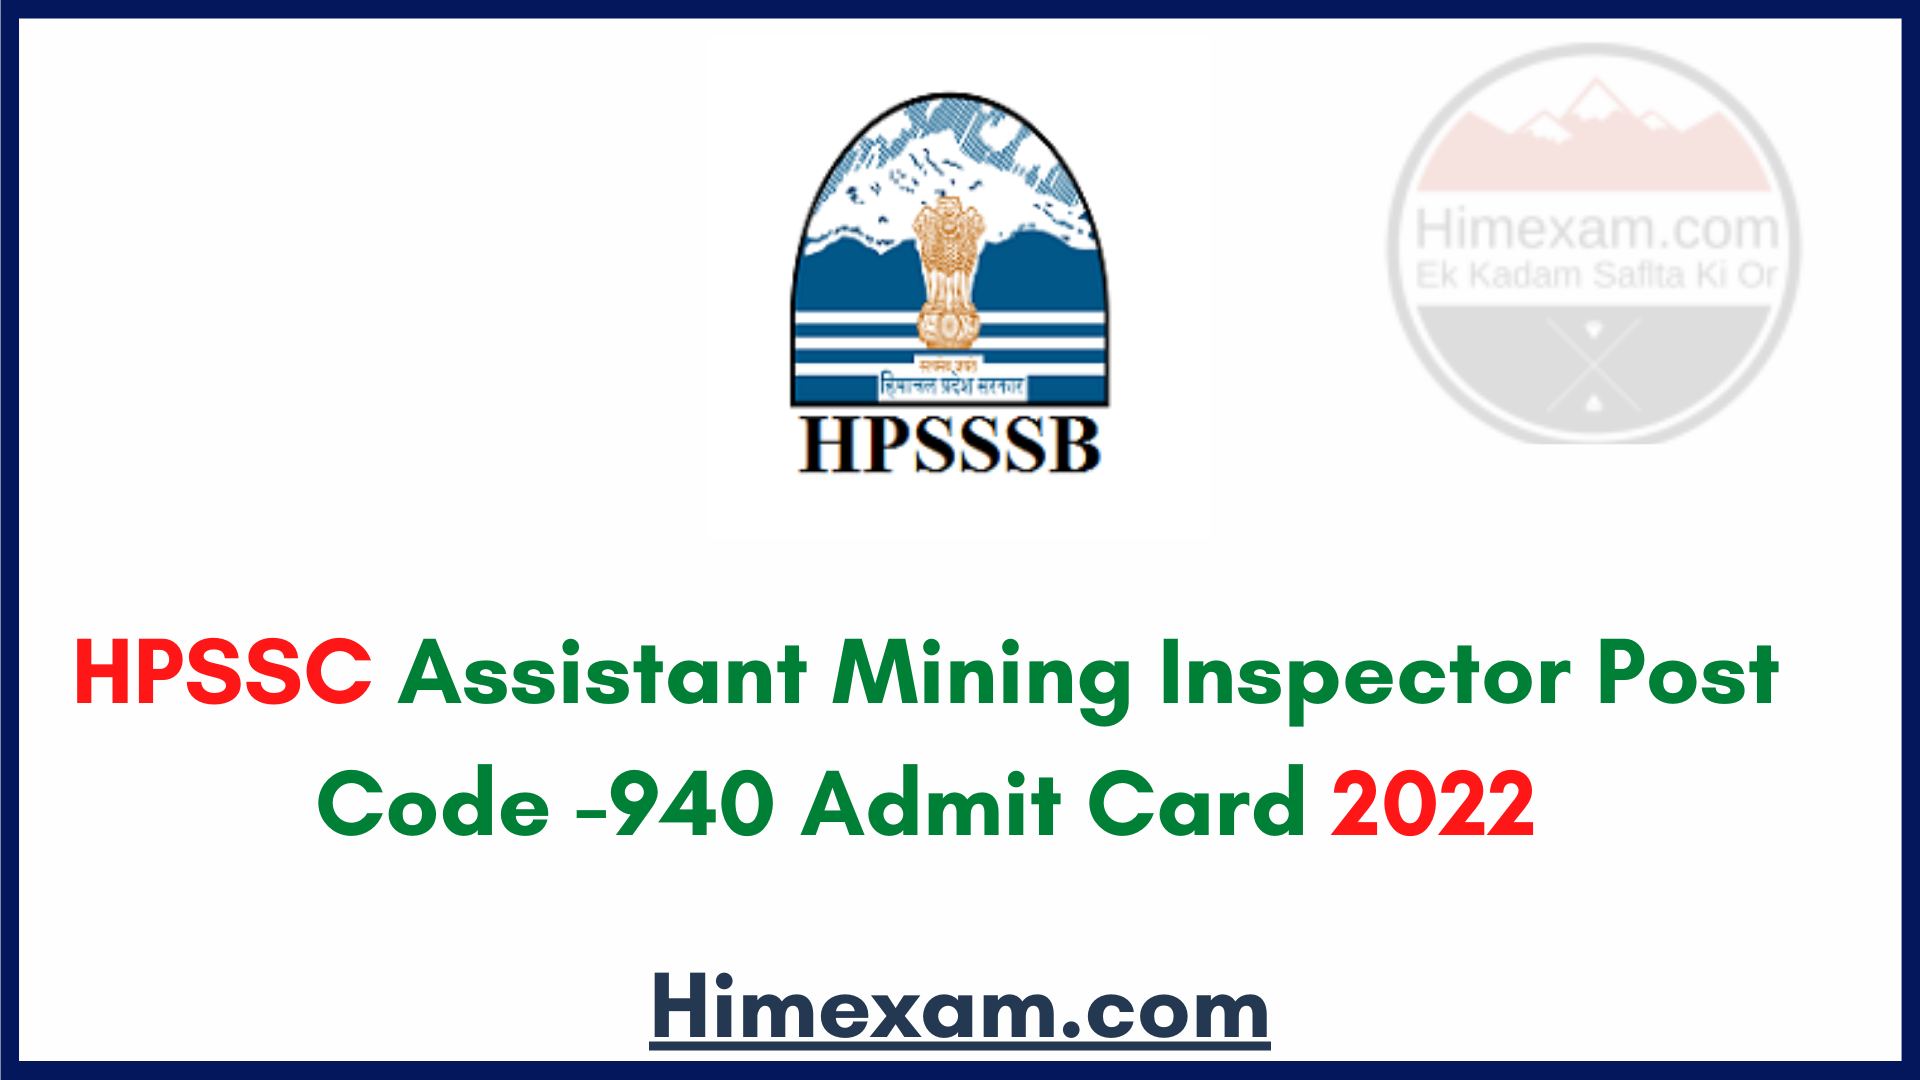 HPSSC Assistant Mining Inspector Post Code -940 Admit Card 2022